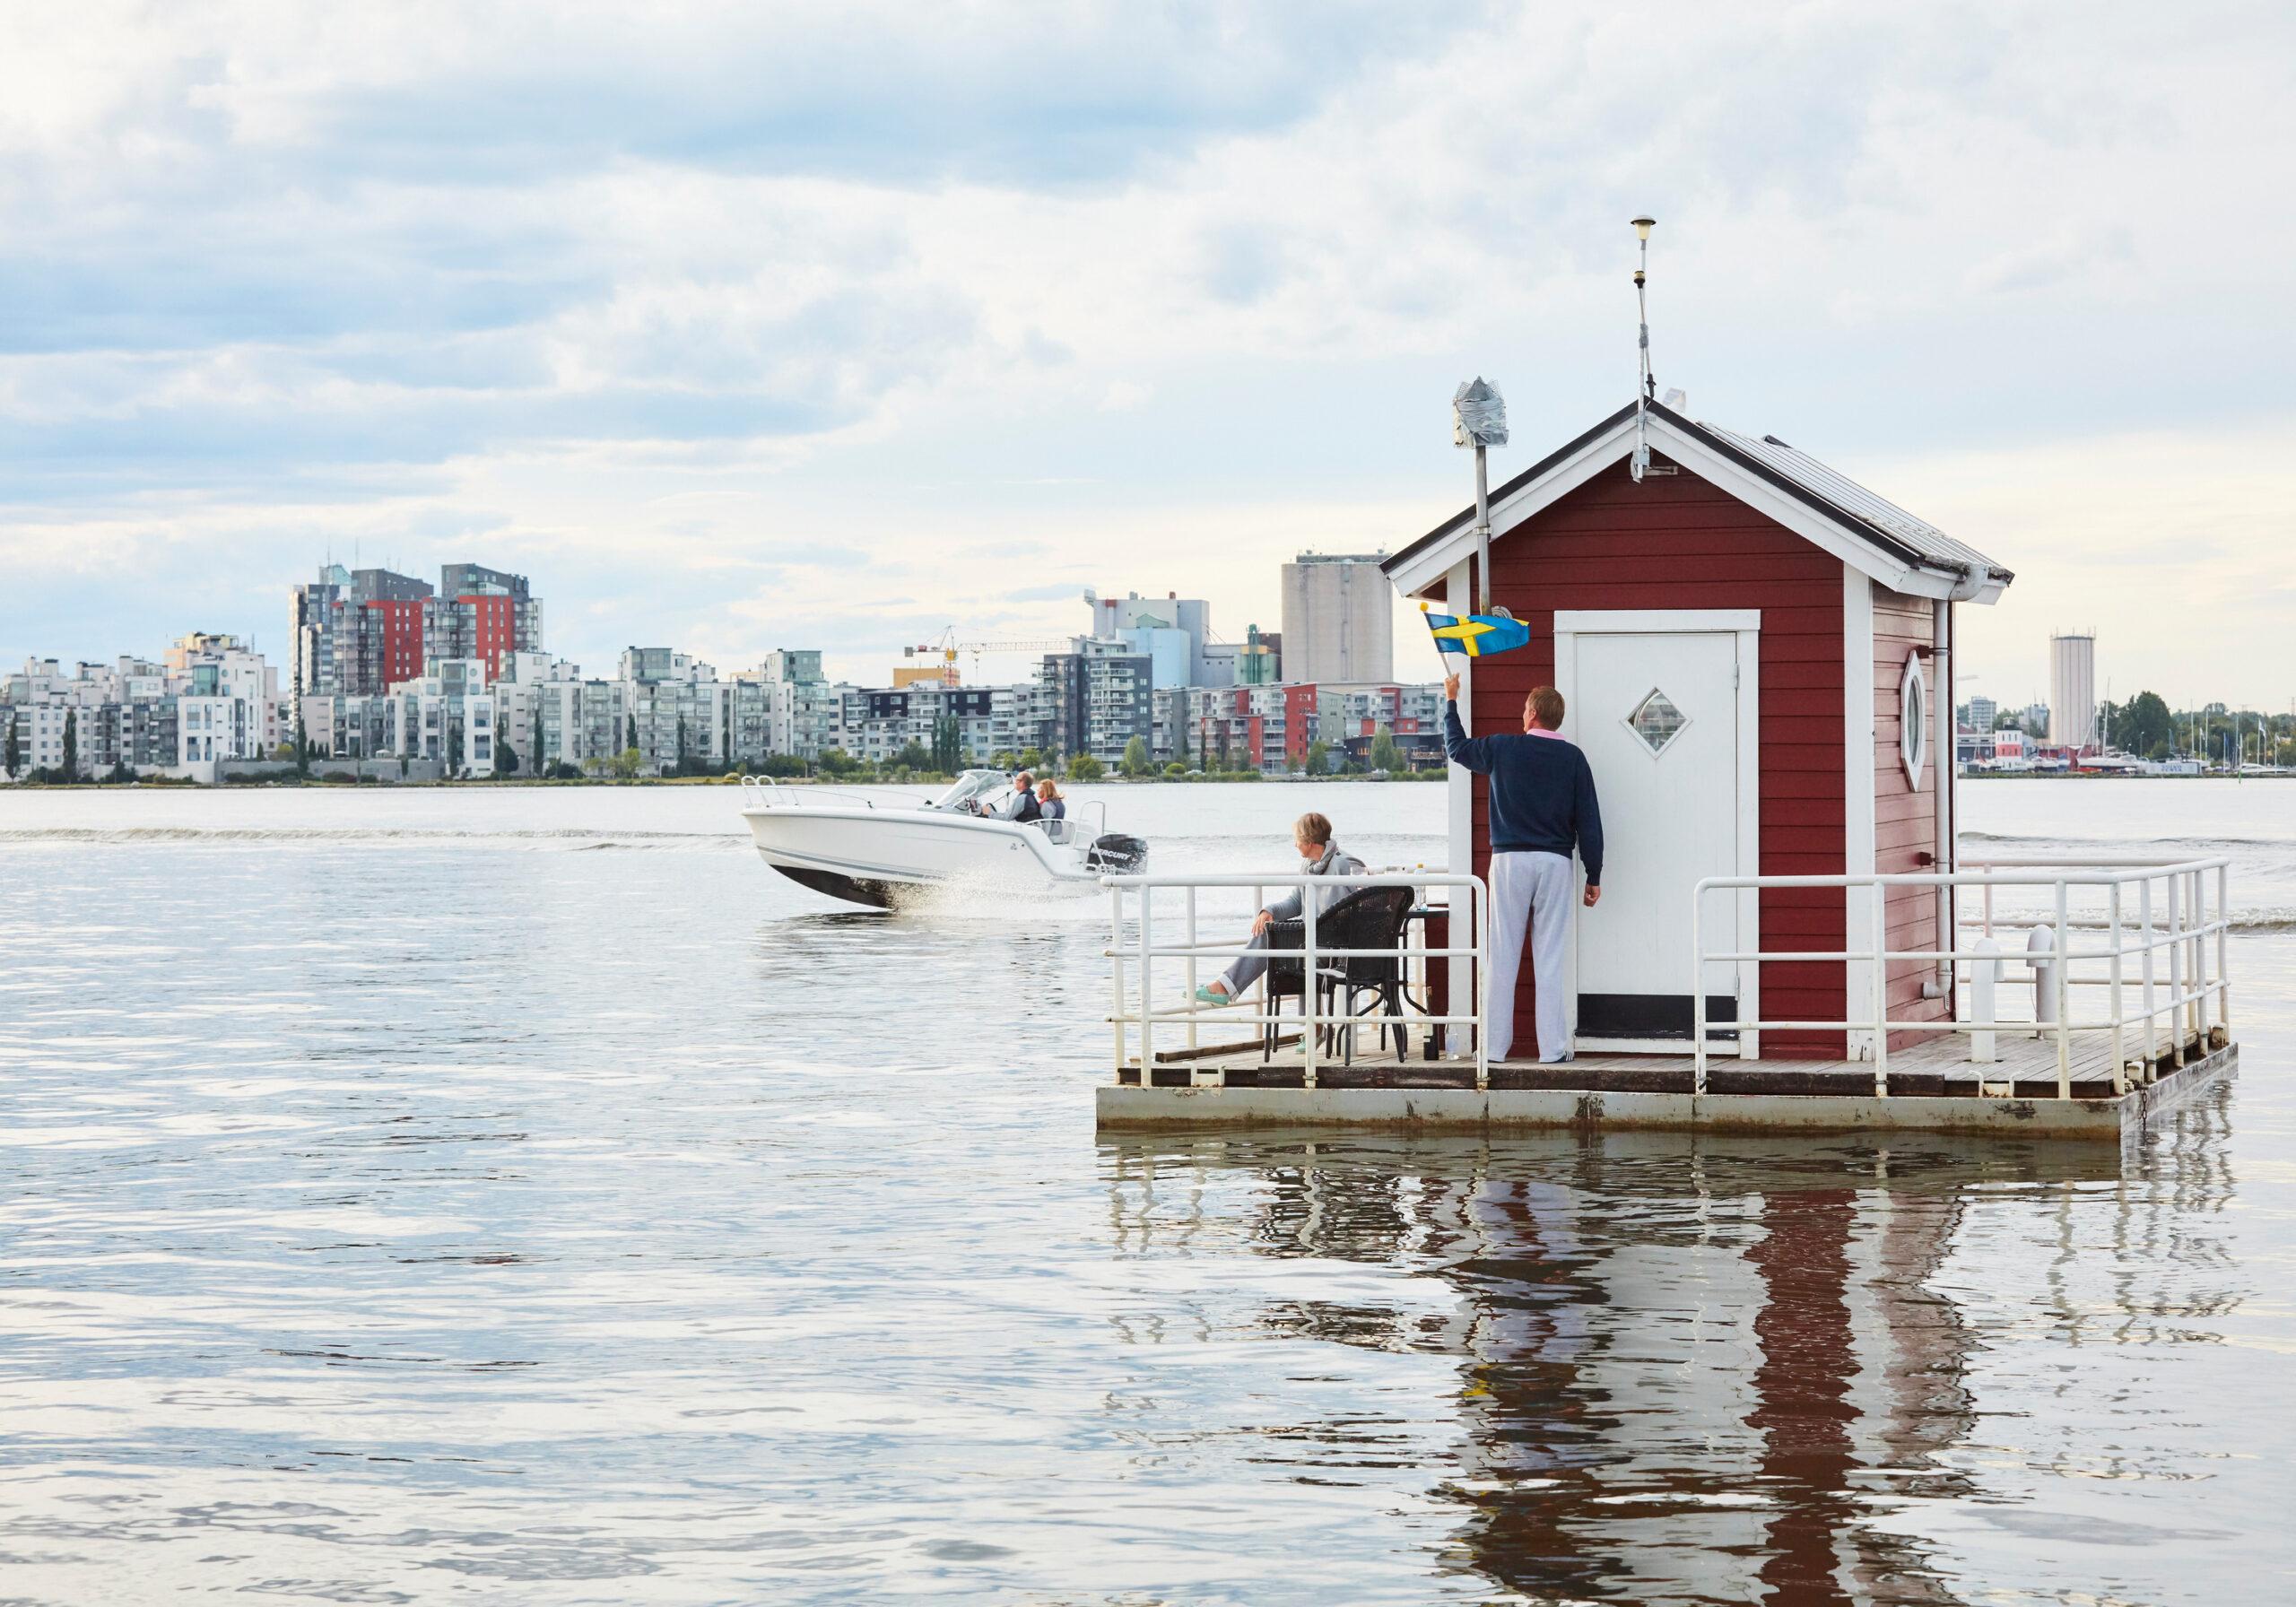 A tiny red cottage with a wooden deck around it floating on water, a city in the background.